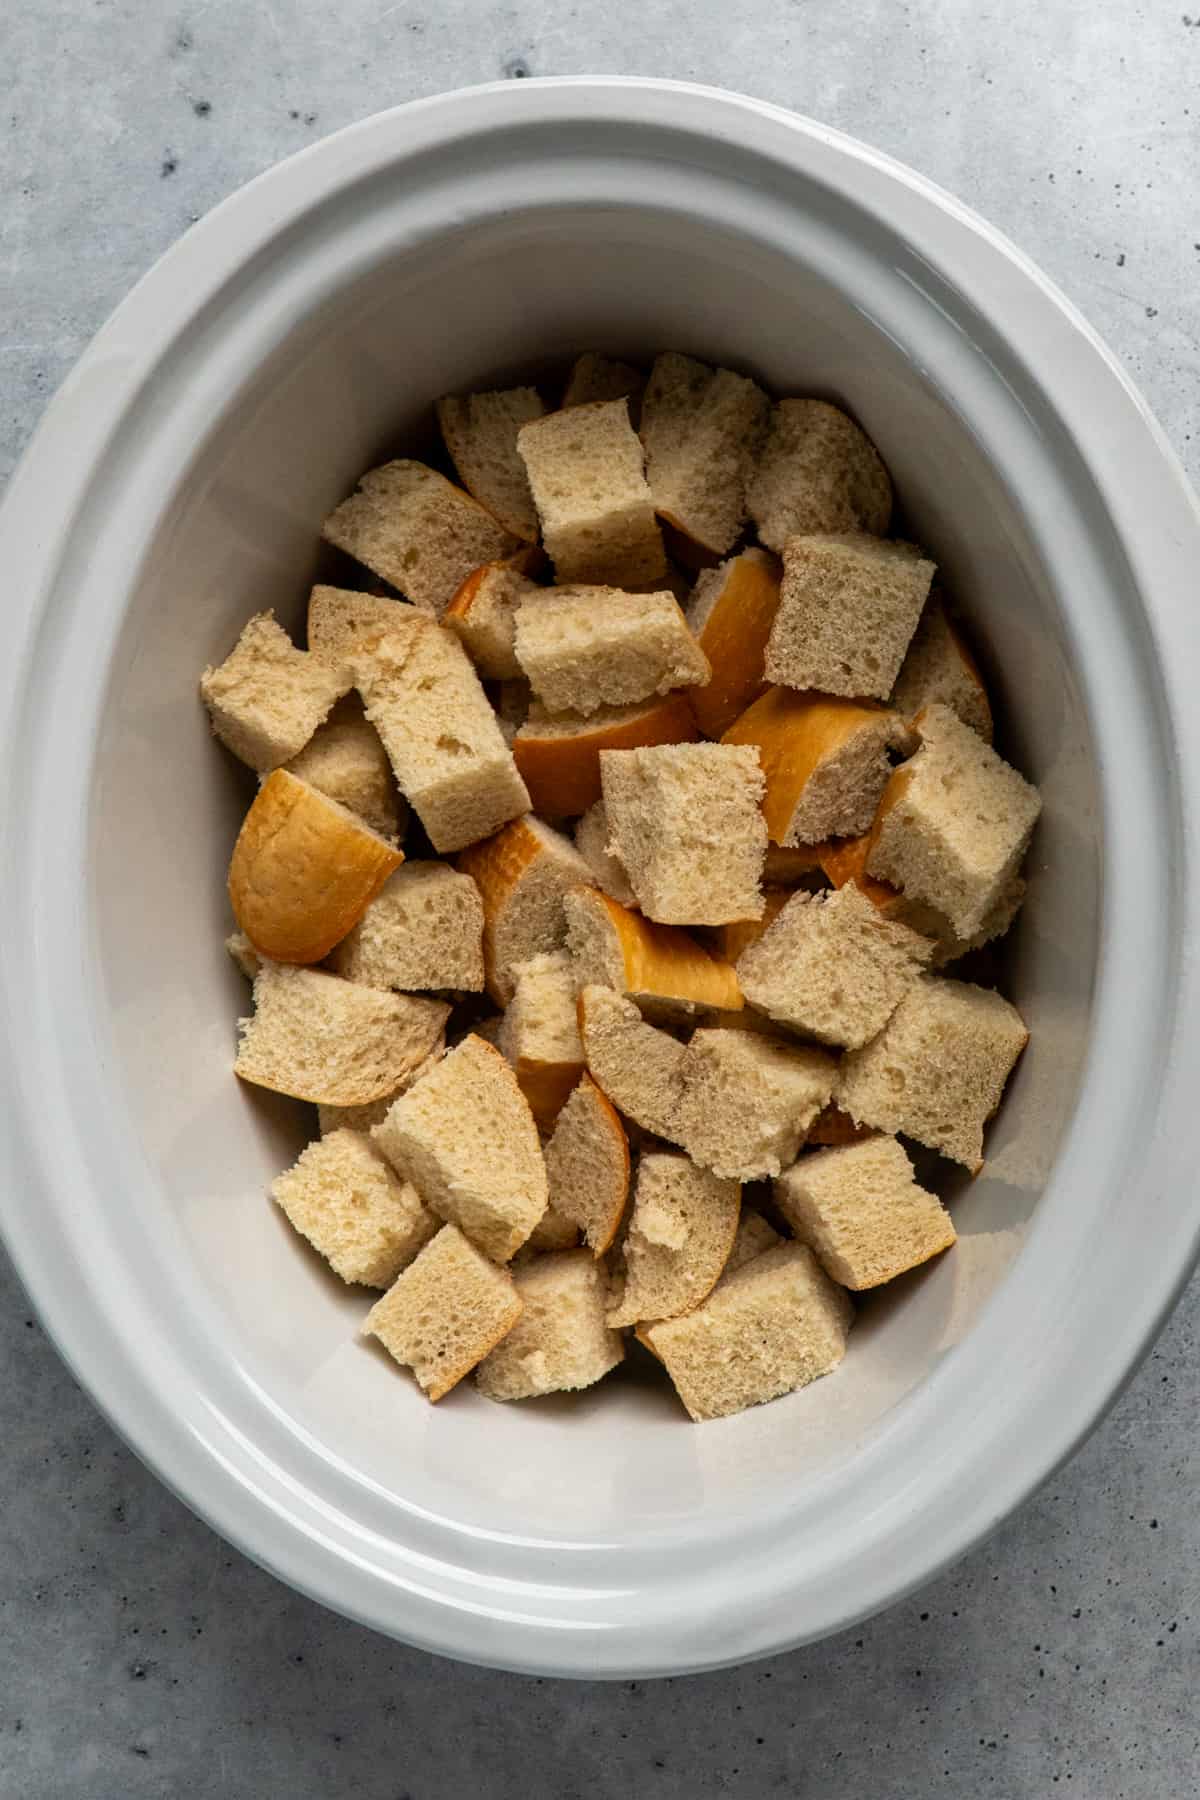 One inch pieces of bread in a slow cooker.